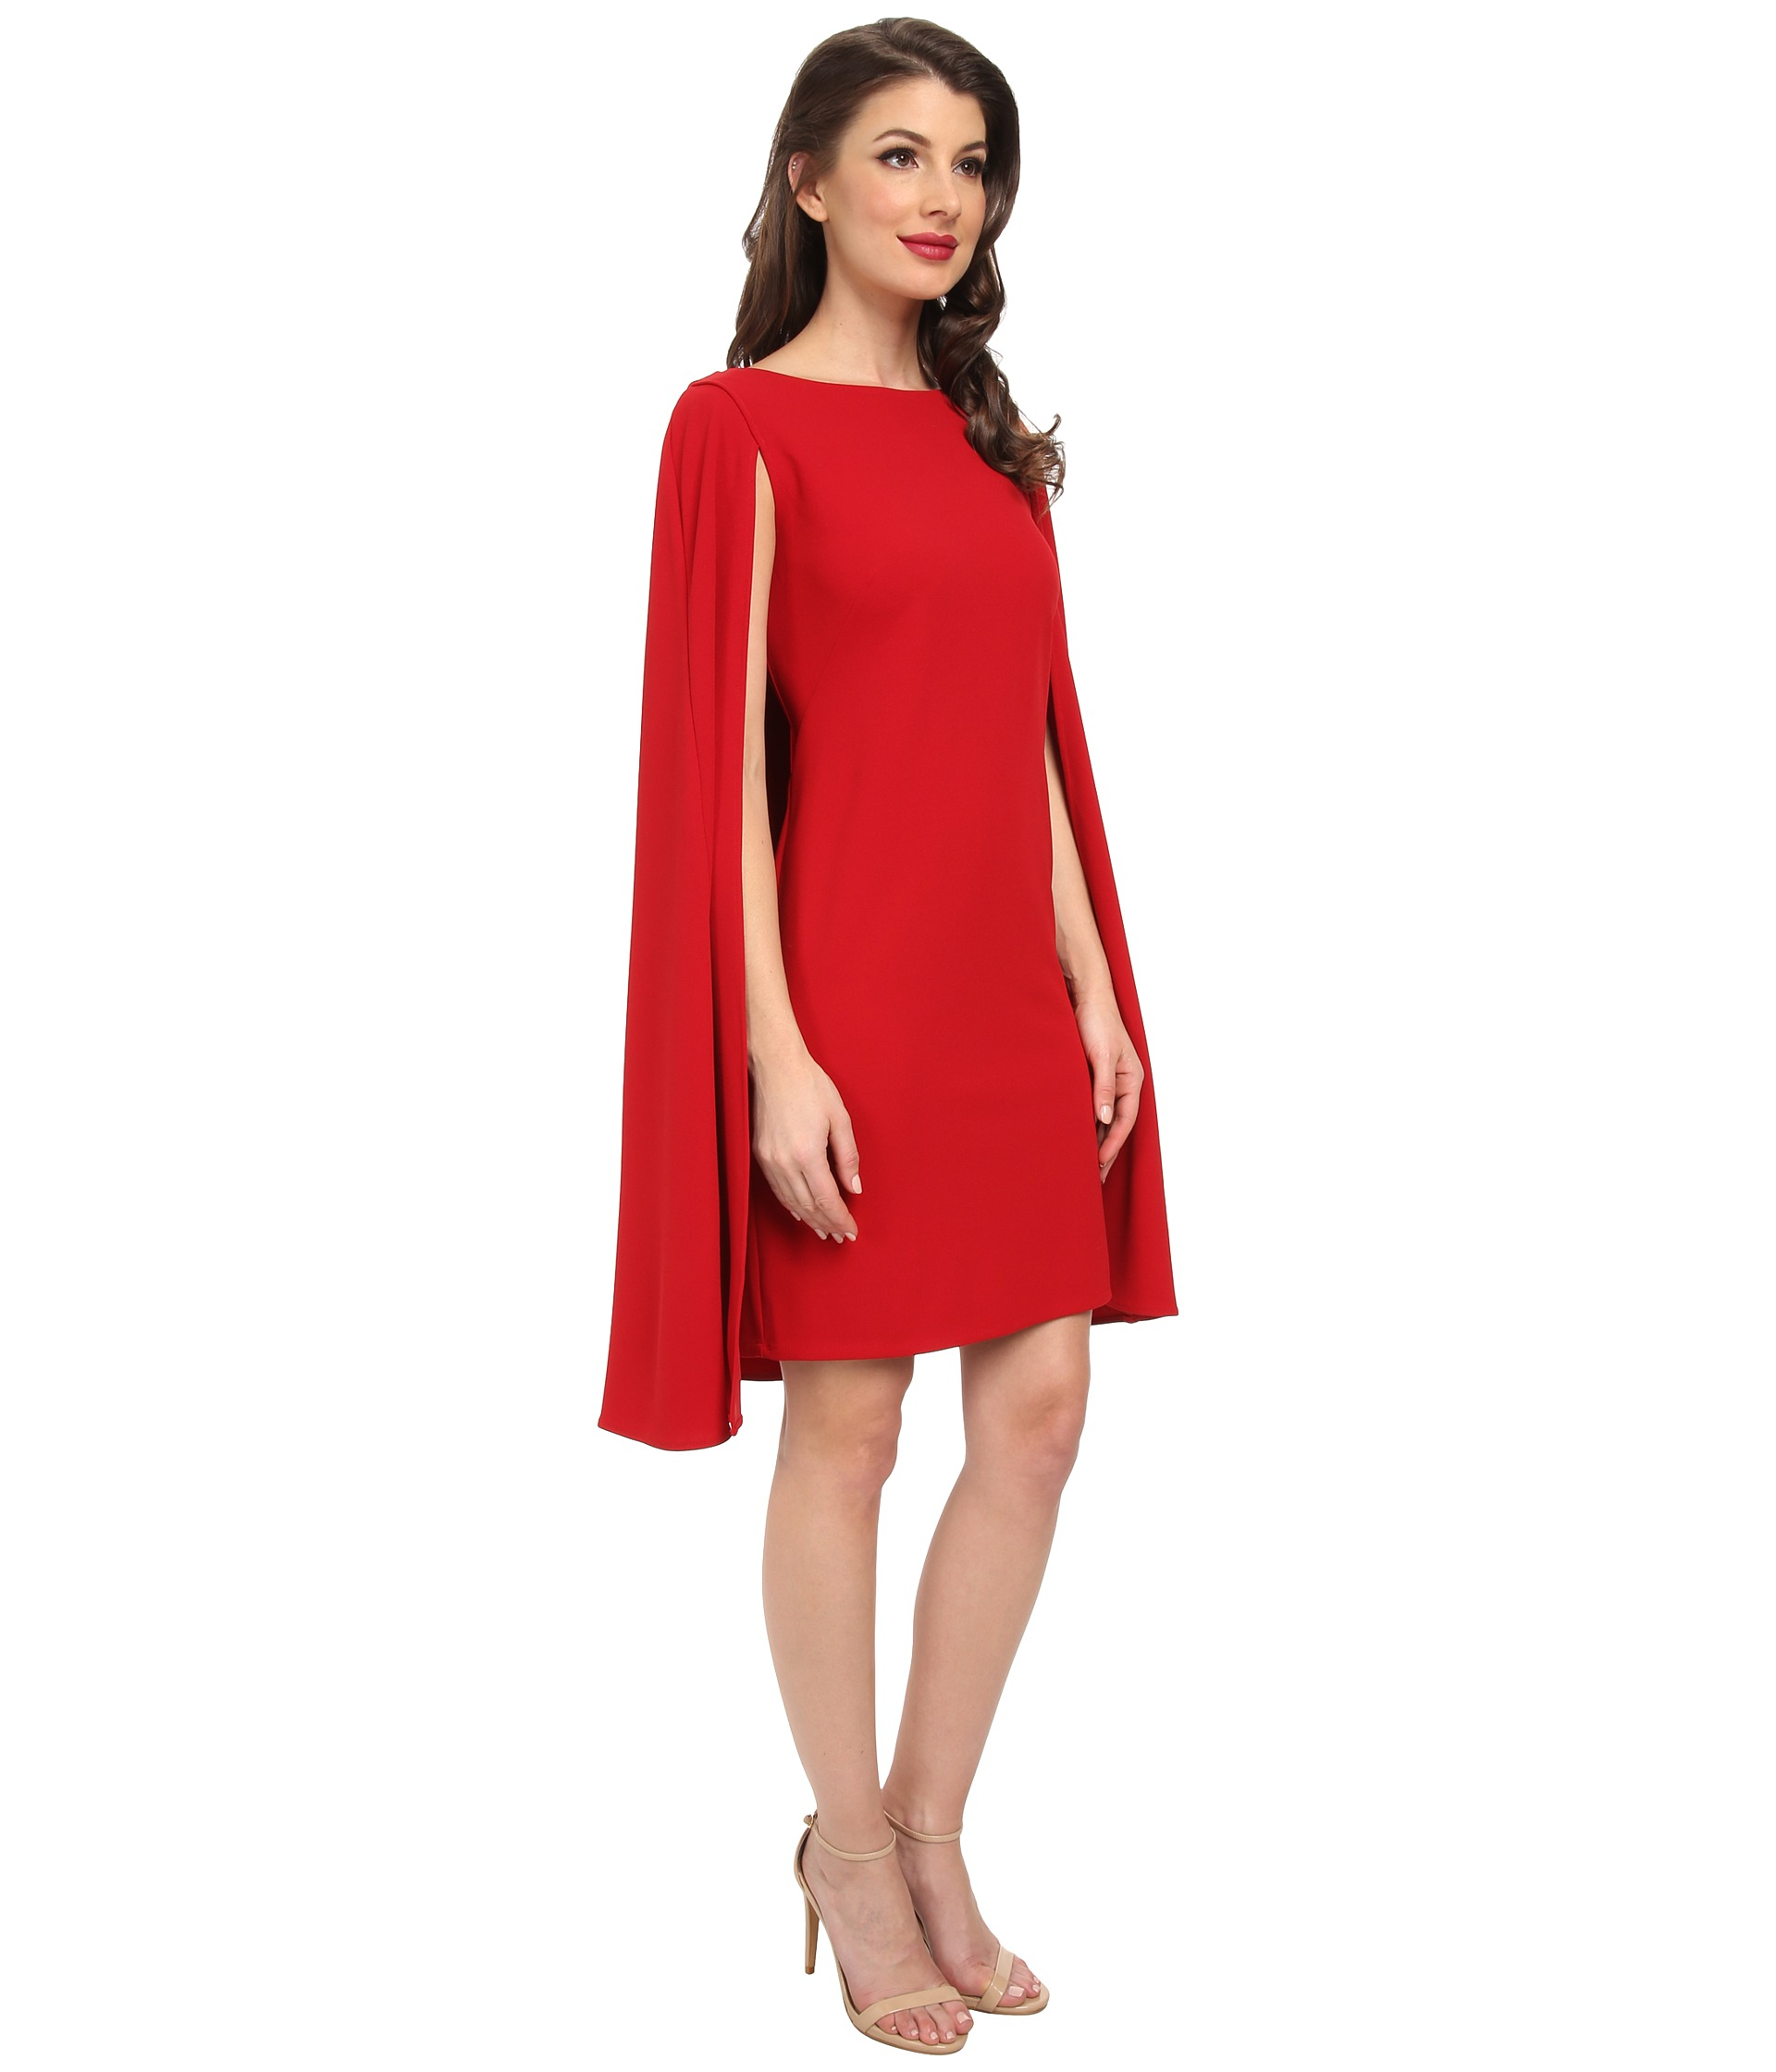 Adrianna Papell Structured Cape Sheath Dress - Lyst